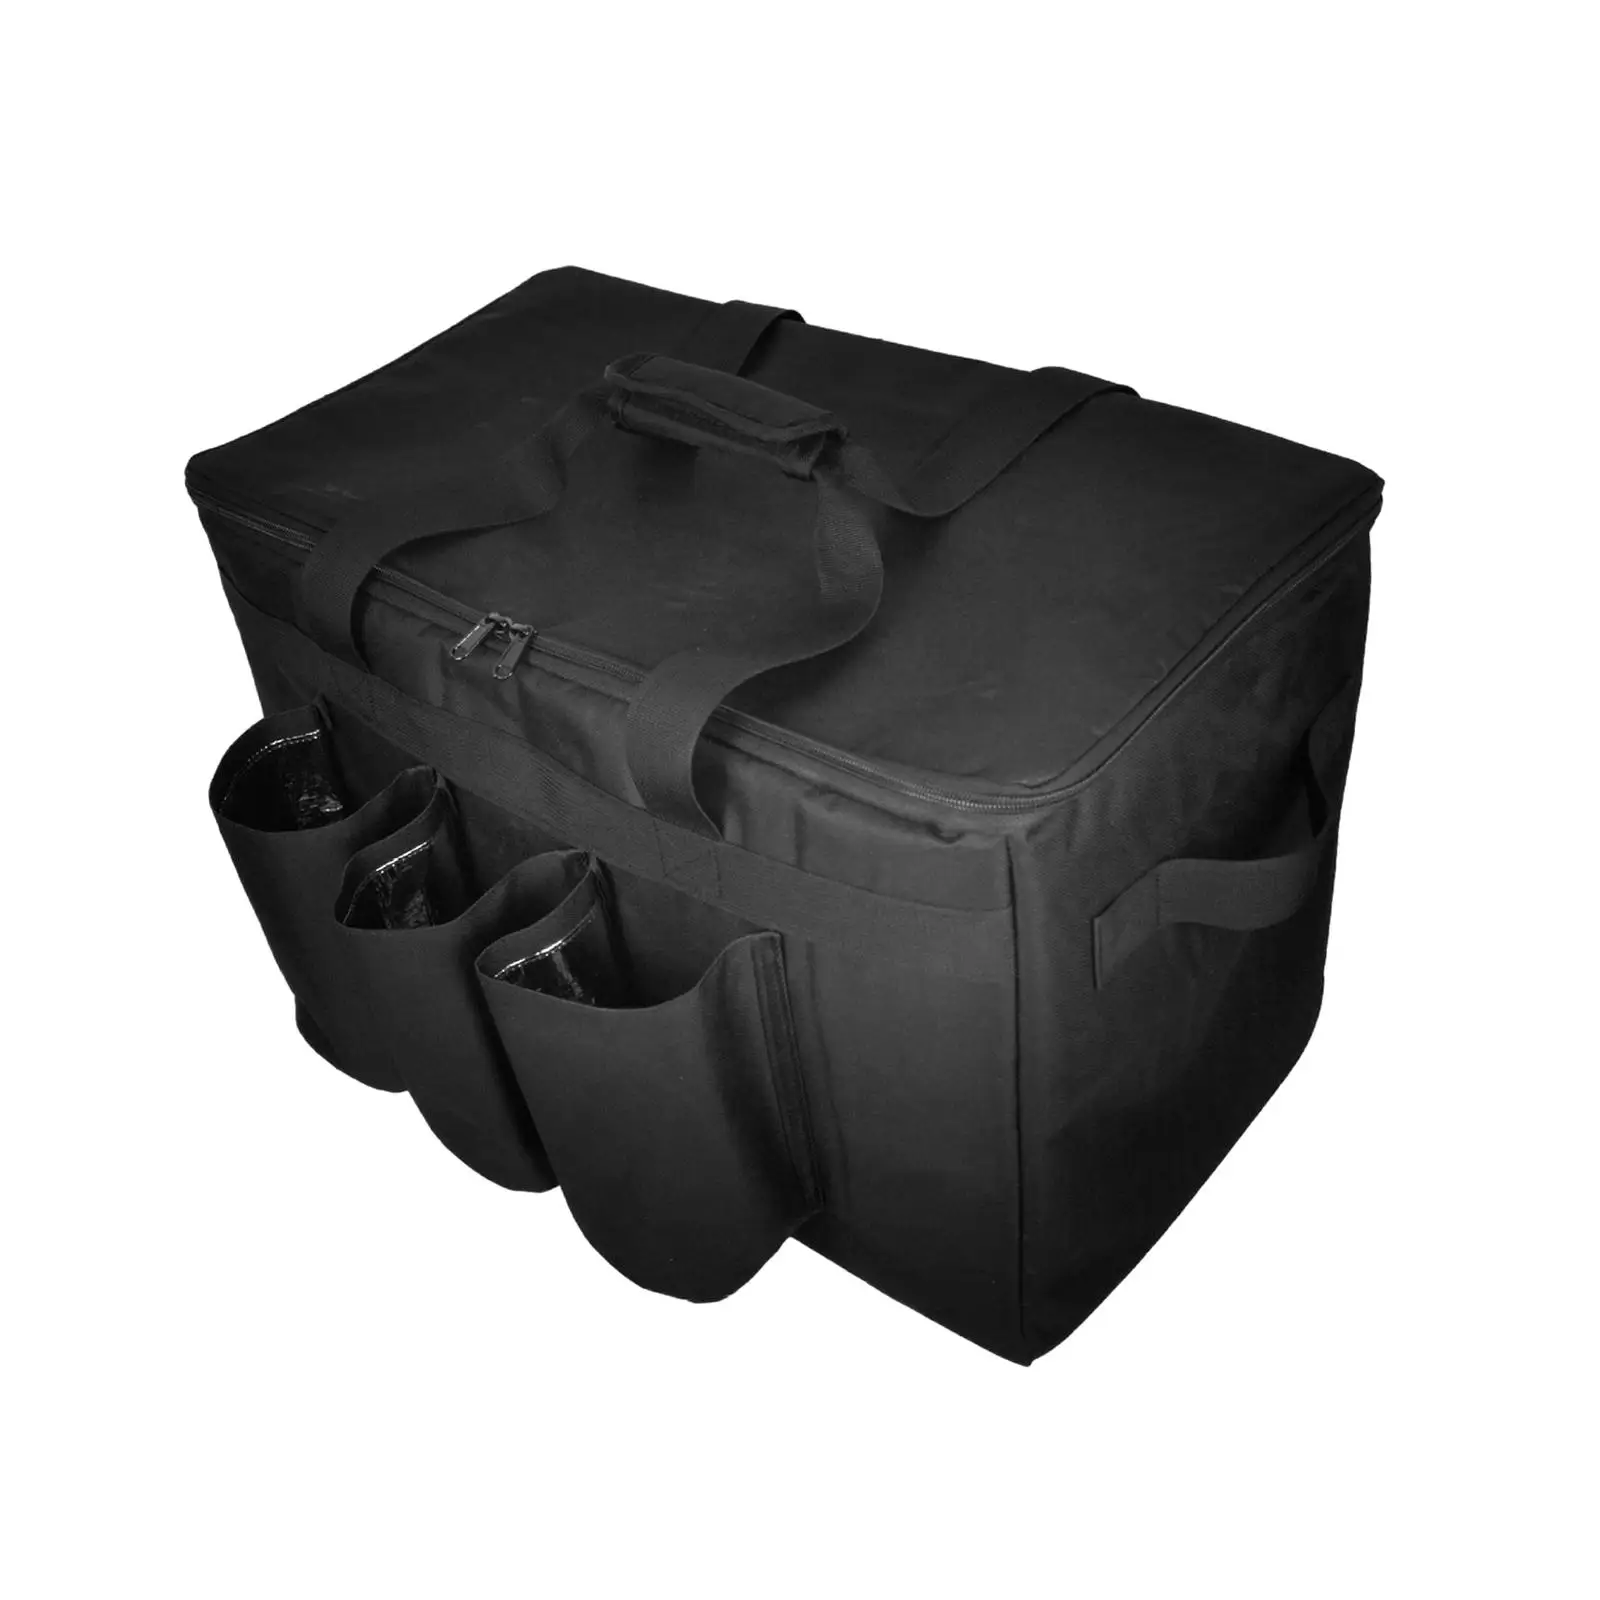 Insulated Food Delivery Bag Thickened Insulated Picnic Bag Thermal Food Delivery Bag for Shopping Picnic Catering Home Outdoor